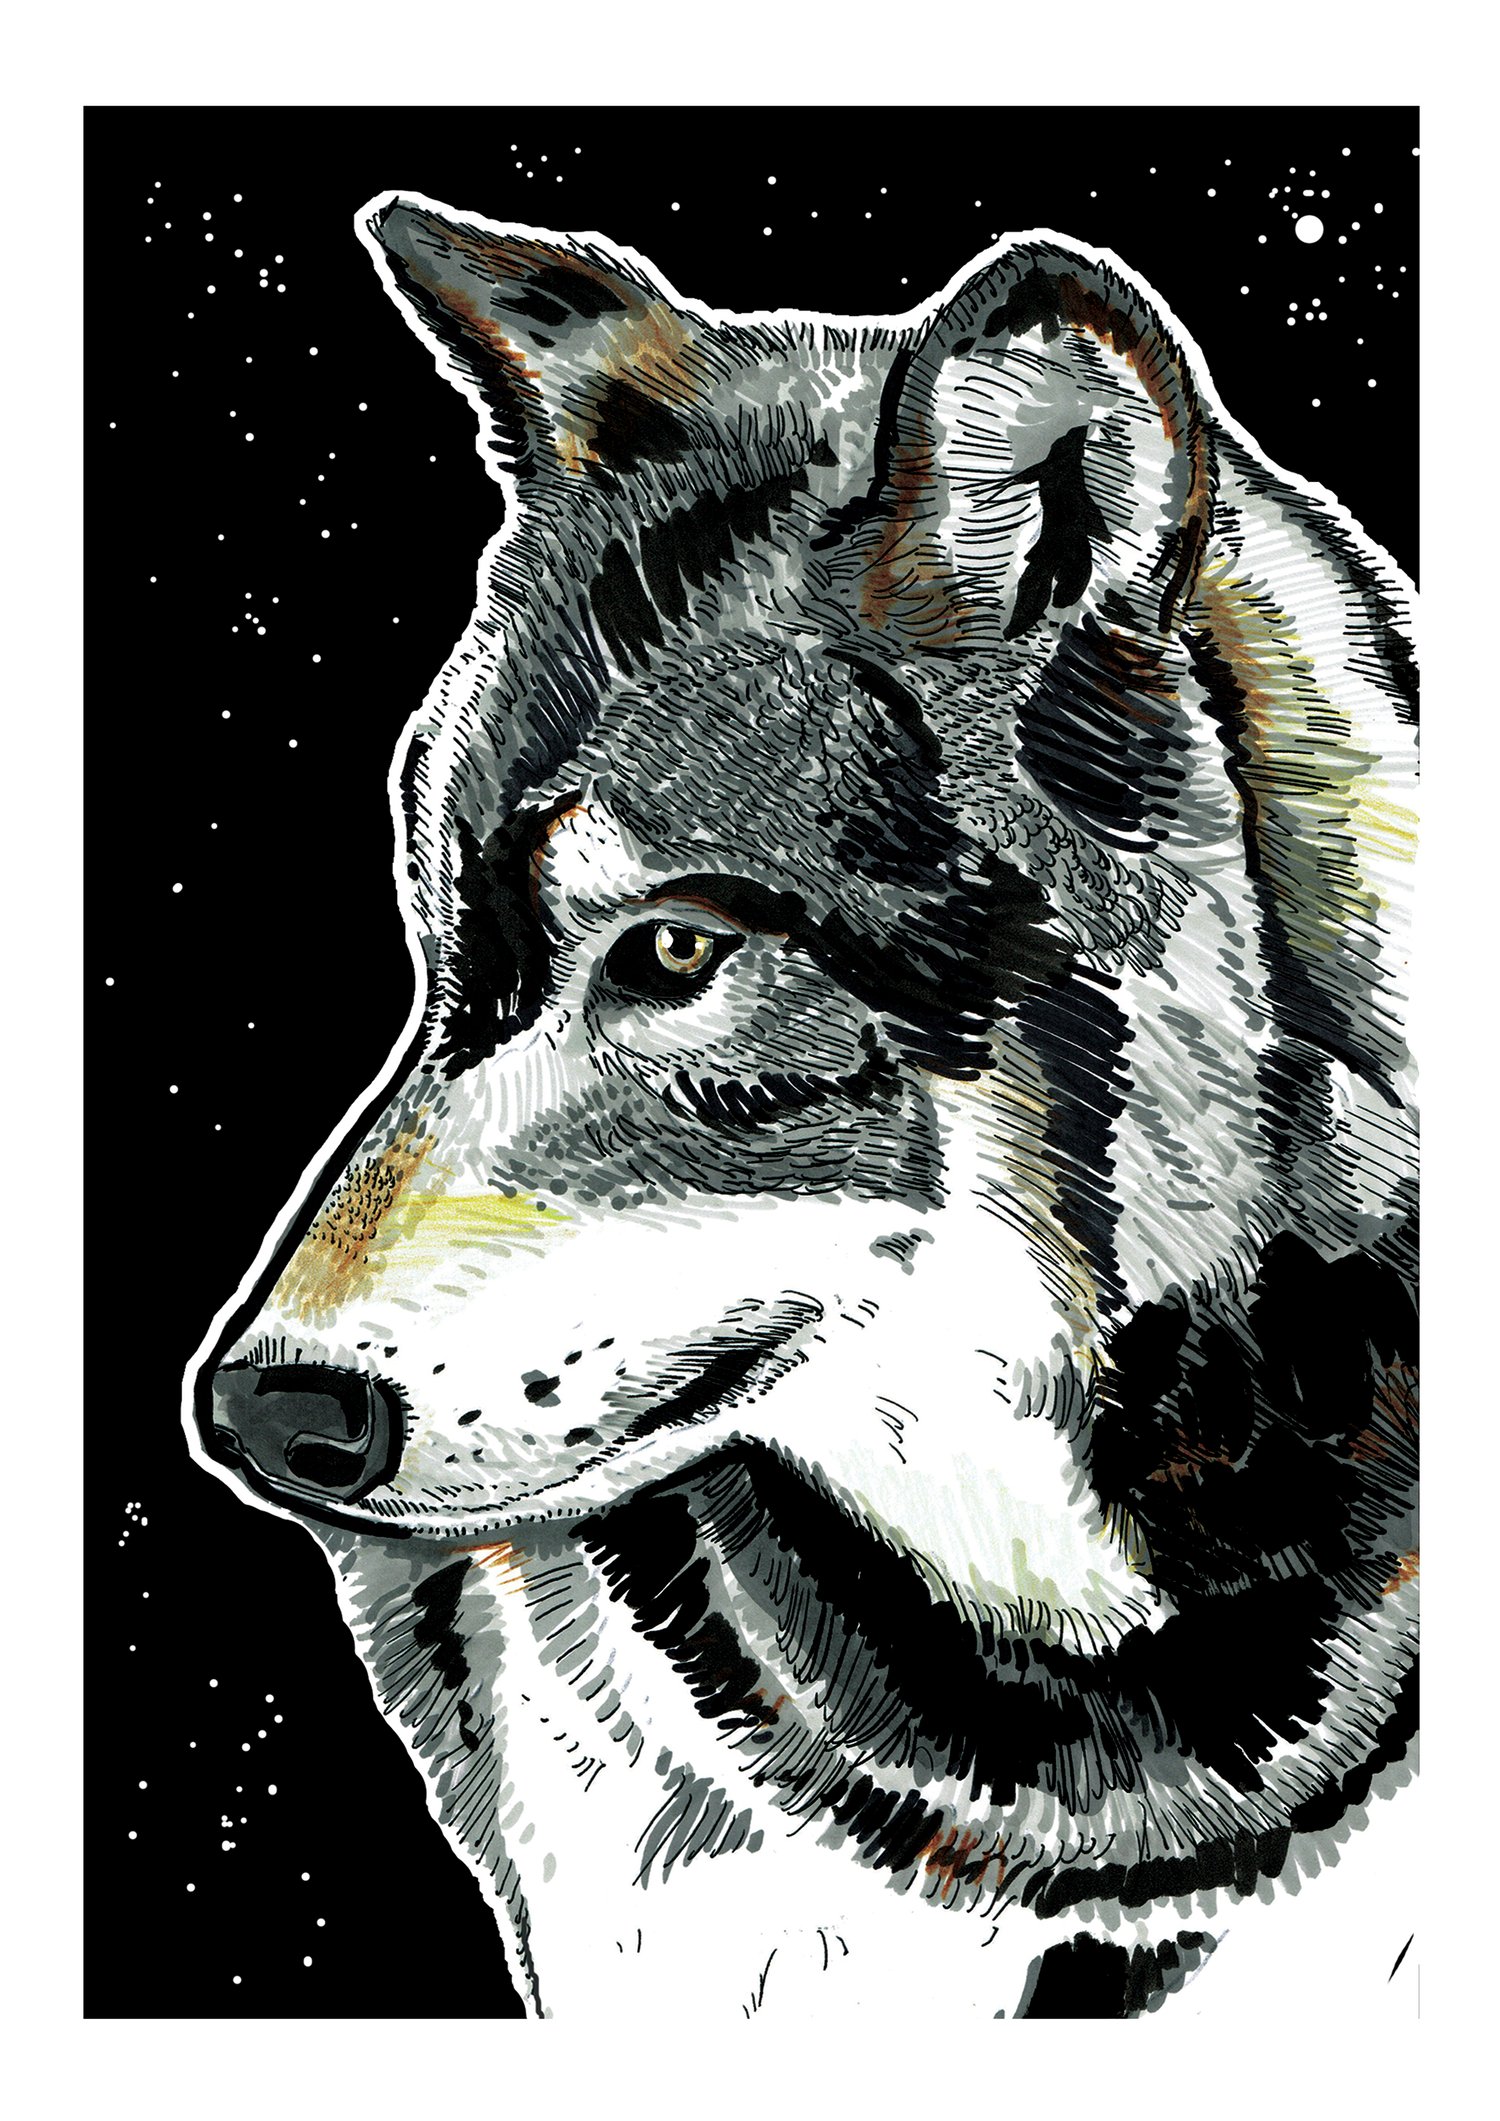 Image of Wolf At Night Art Print Signed A3 Size (16" x 12")